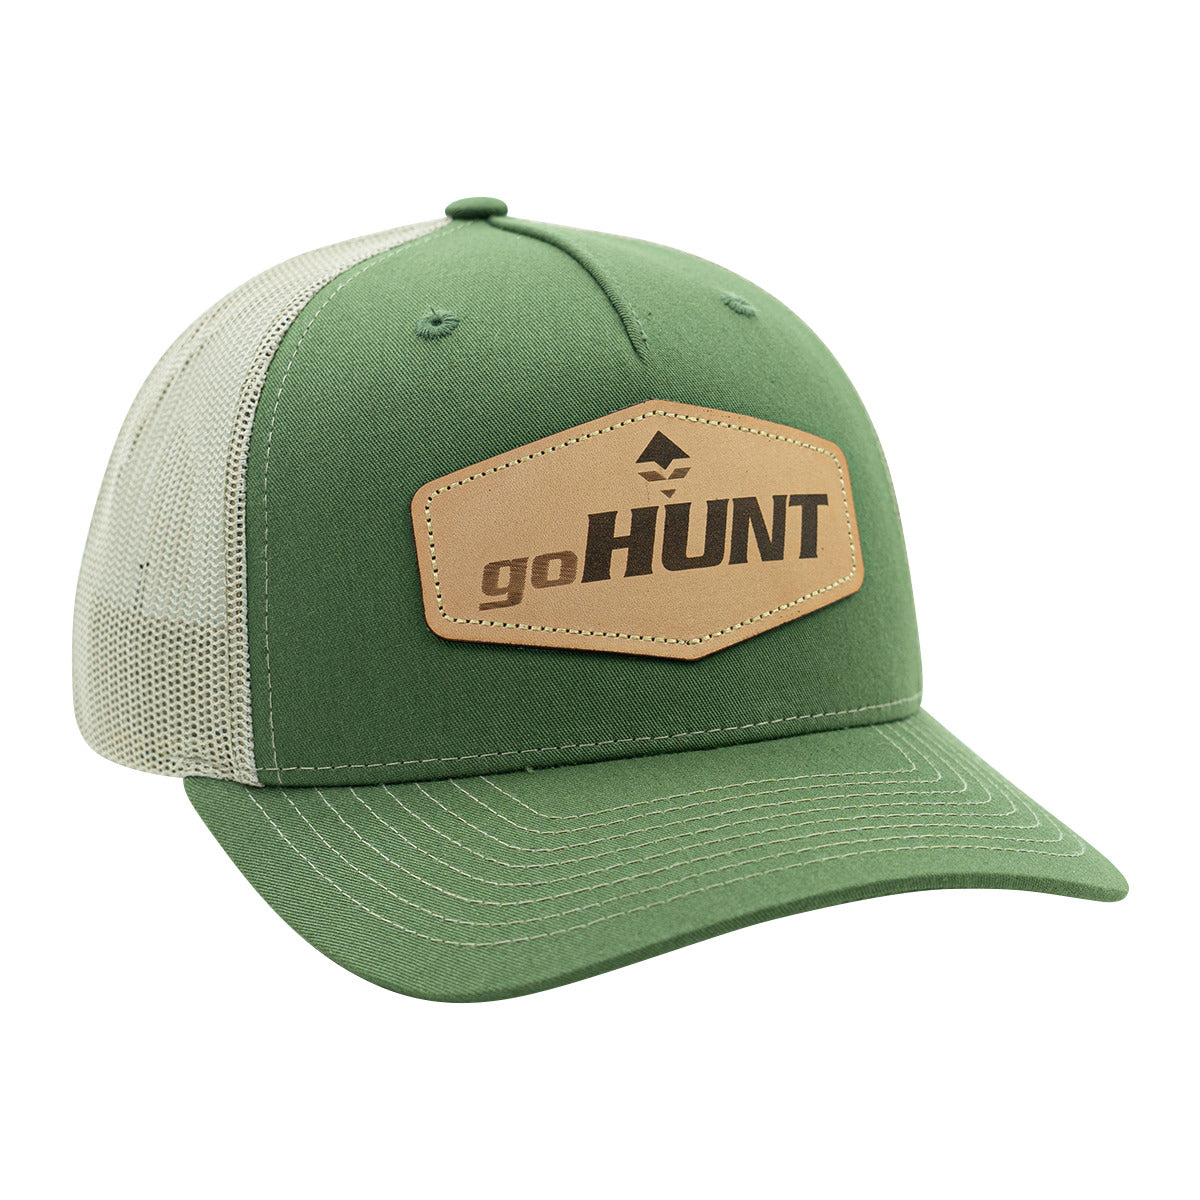 Trout Fisher by goHUNT | Apparel - goHUNT Shop